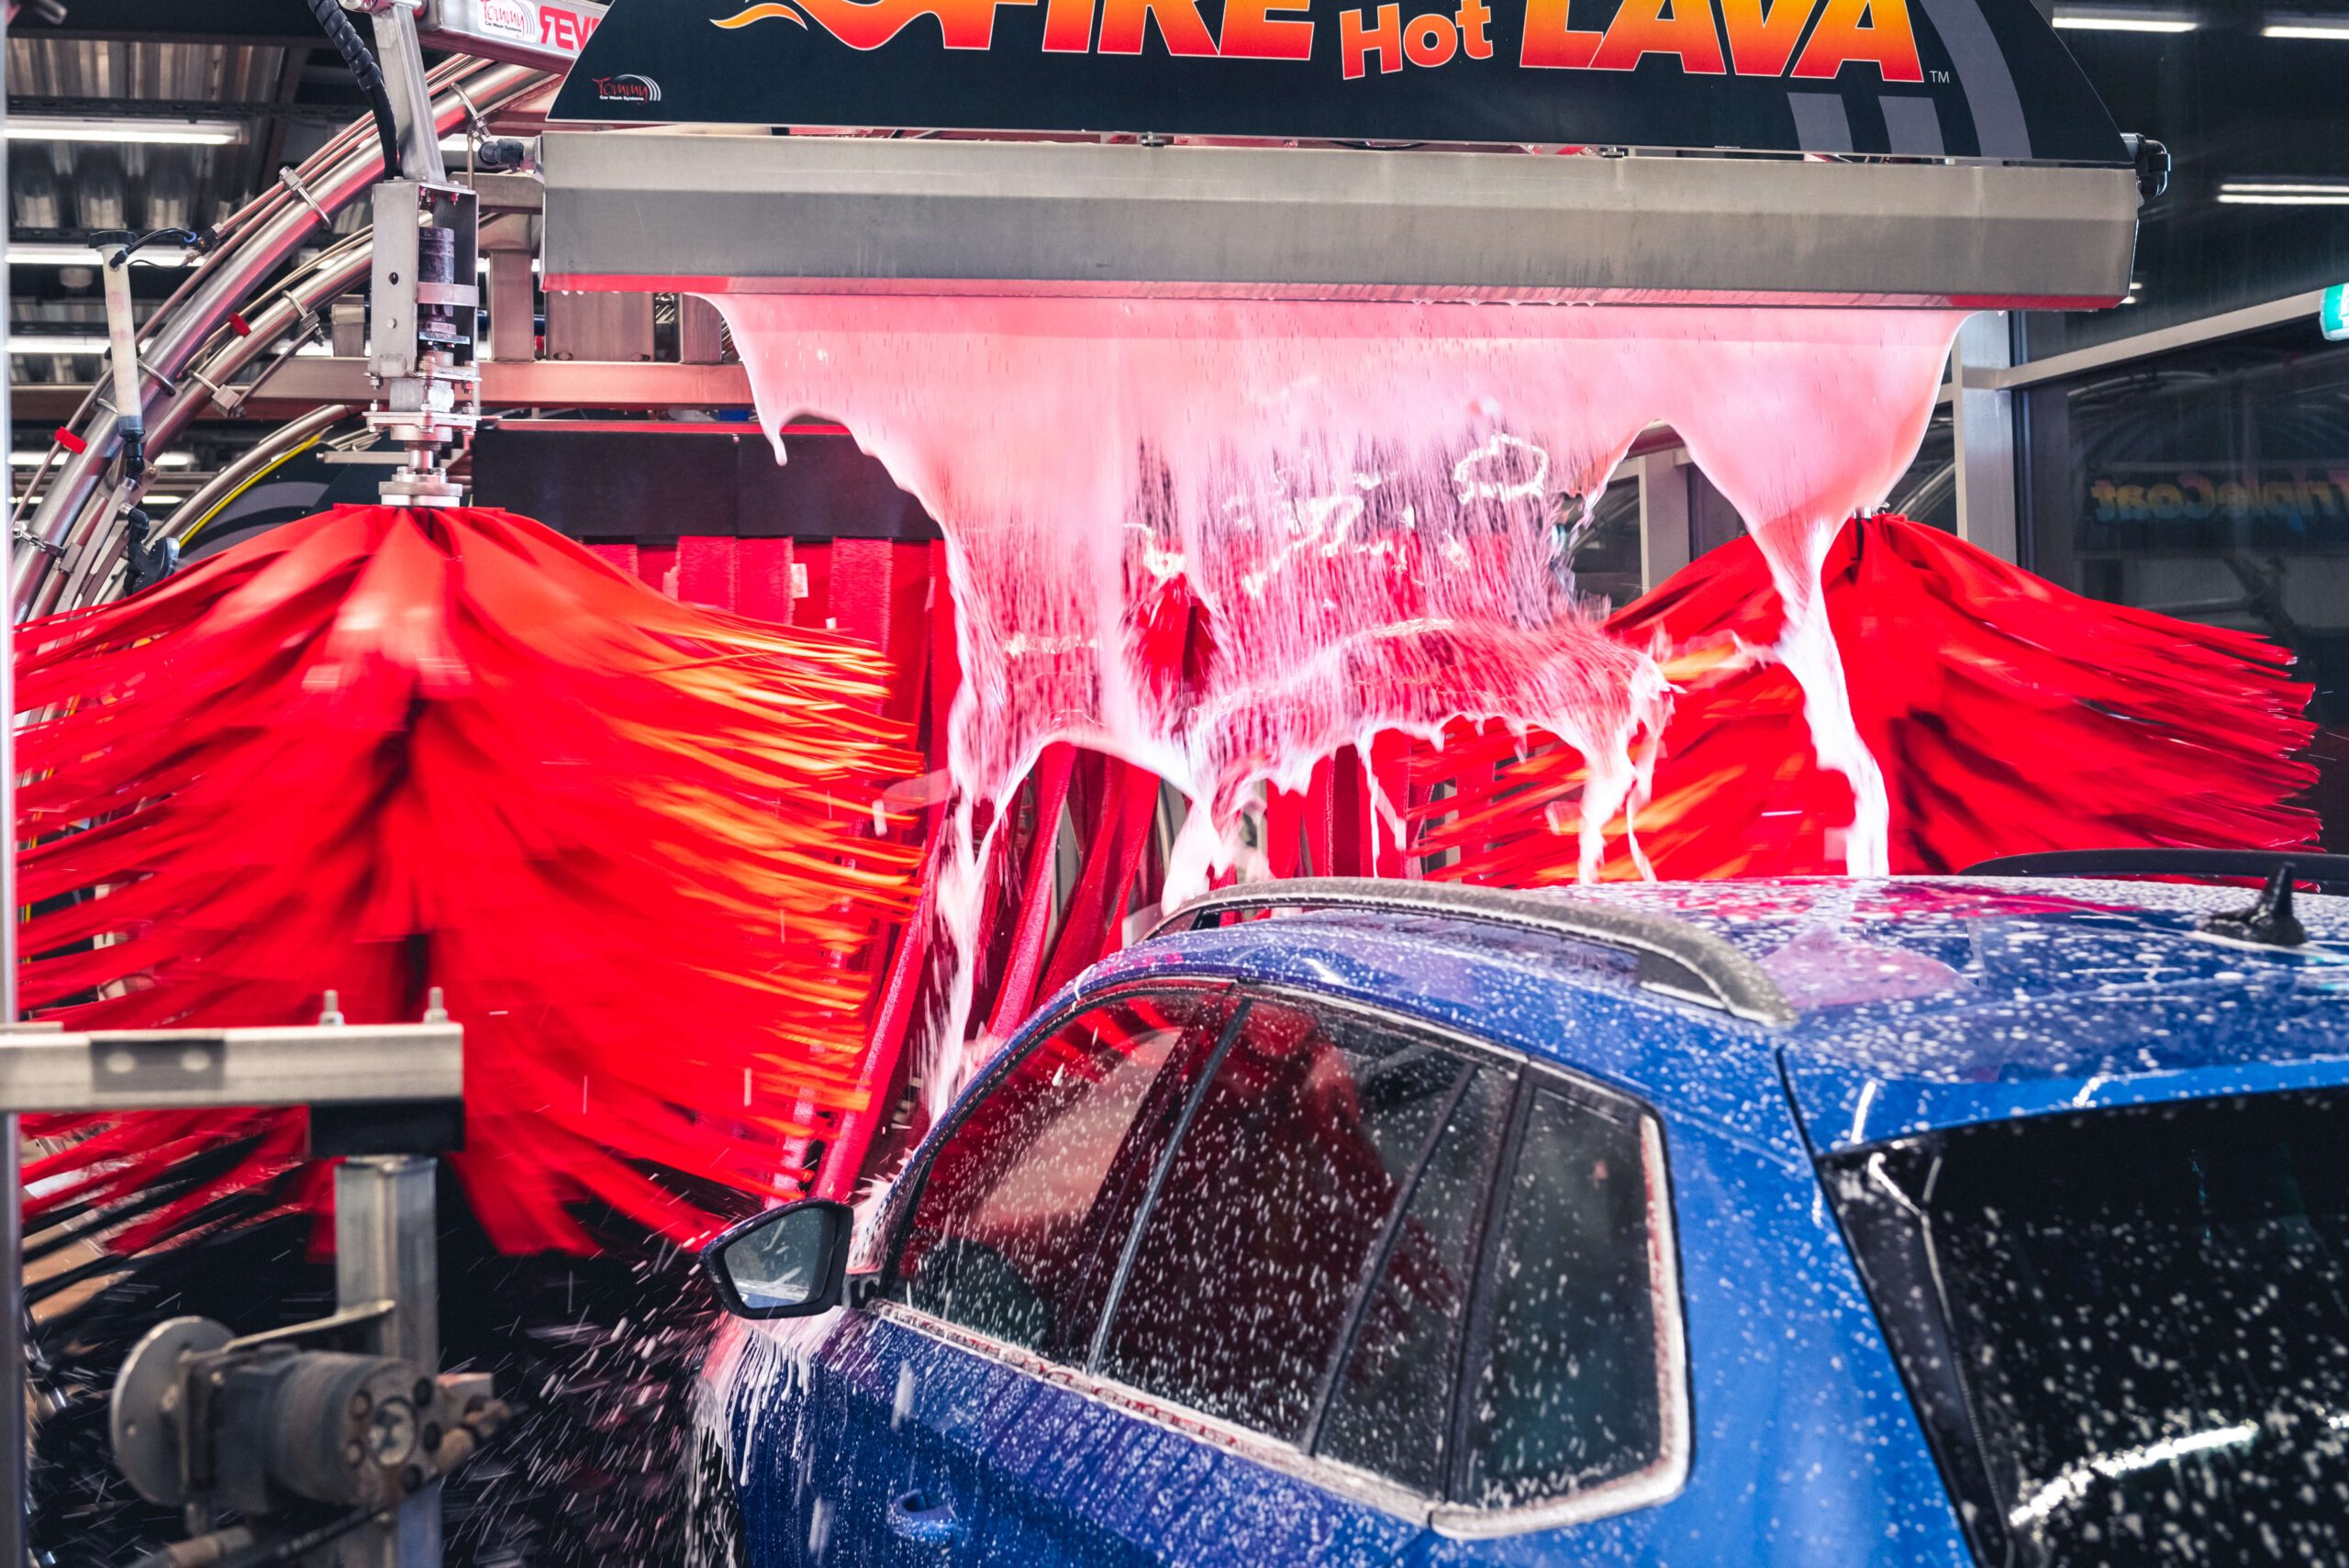 The most powerful tunnel car wash in Europe has opened in Klaipėda